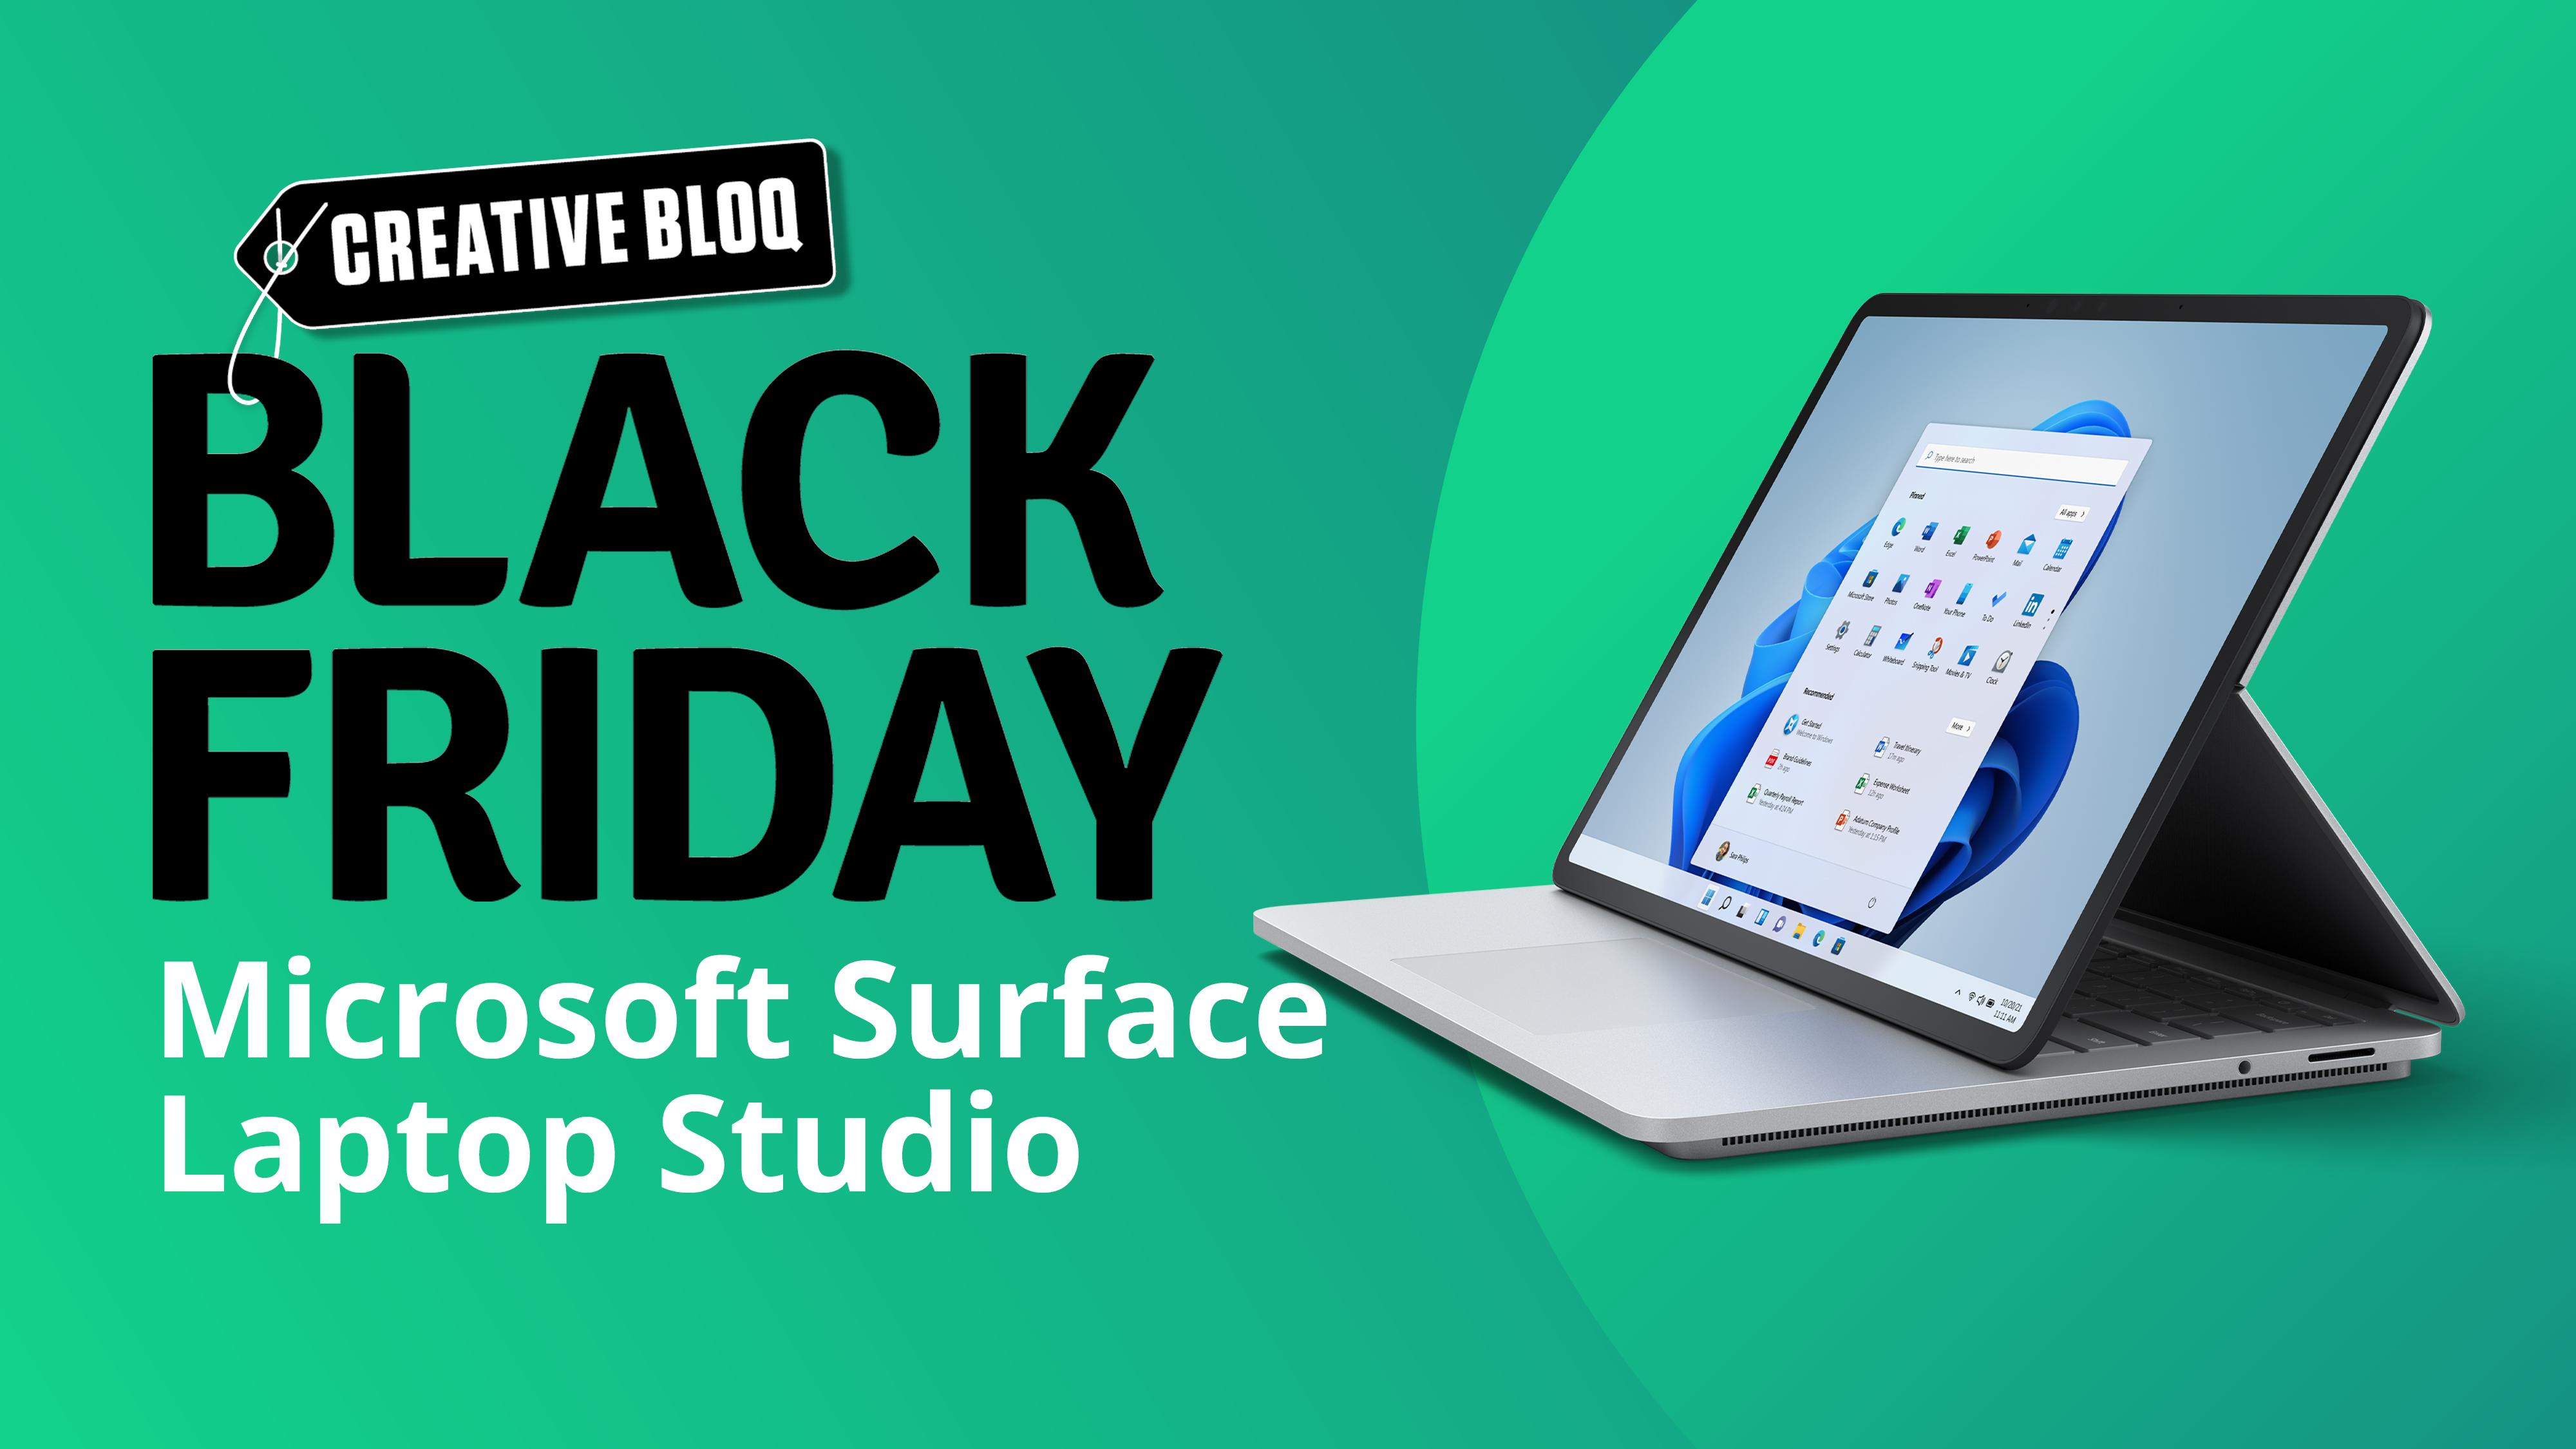 A Microsoft Black Friday deals image, with a Microsoft Surface Laptop Studio on a green background